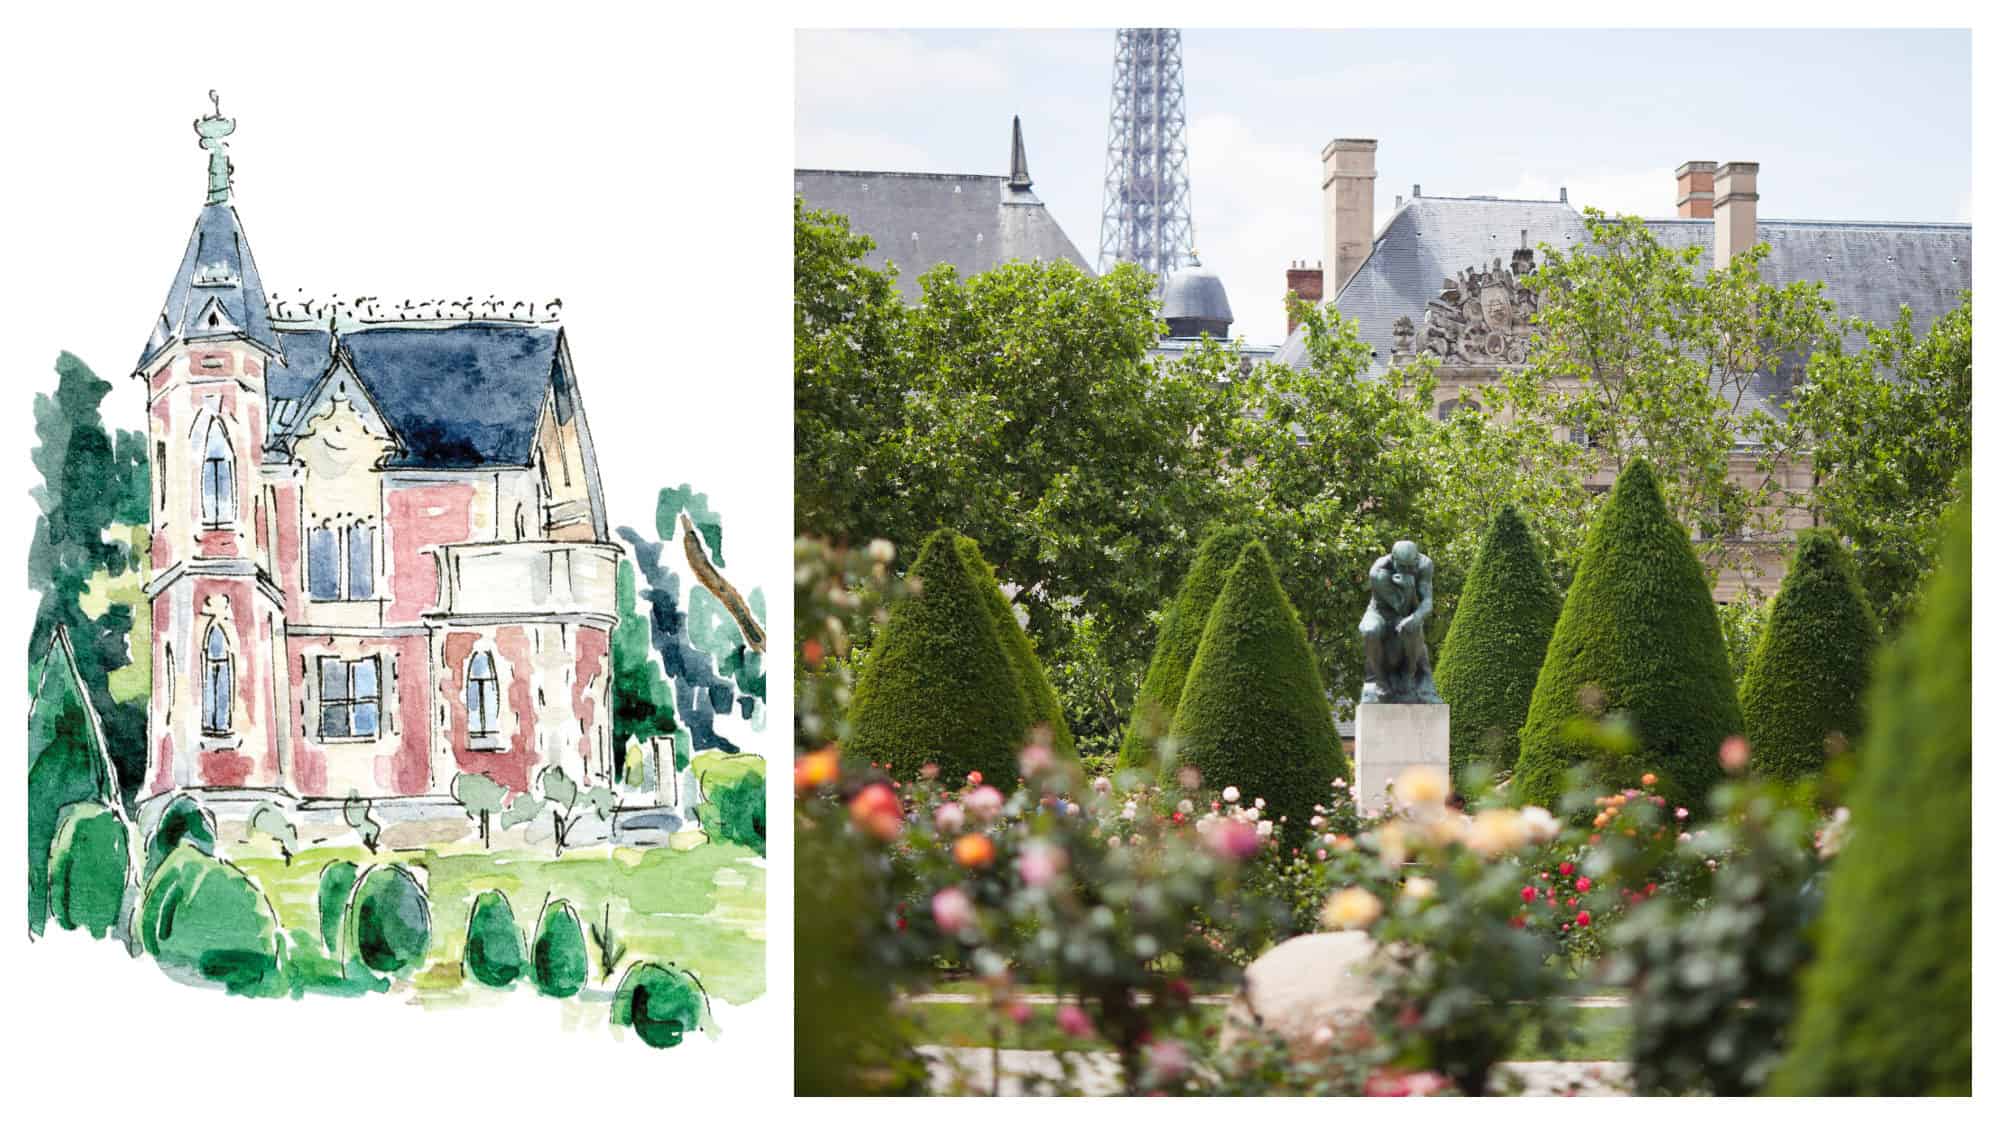 A sketch of the Monte Cristo chateau, Alexandre Dumas' home, now a museum, from illustrator Emma Jacobs' book Little(r) Museums of Paris (left). The Rodin Museum gardens with The Thinker sculpture among the trees (right).